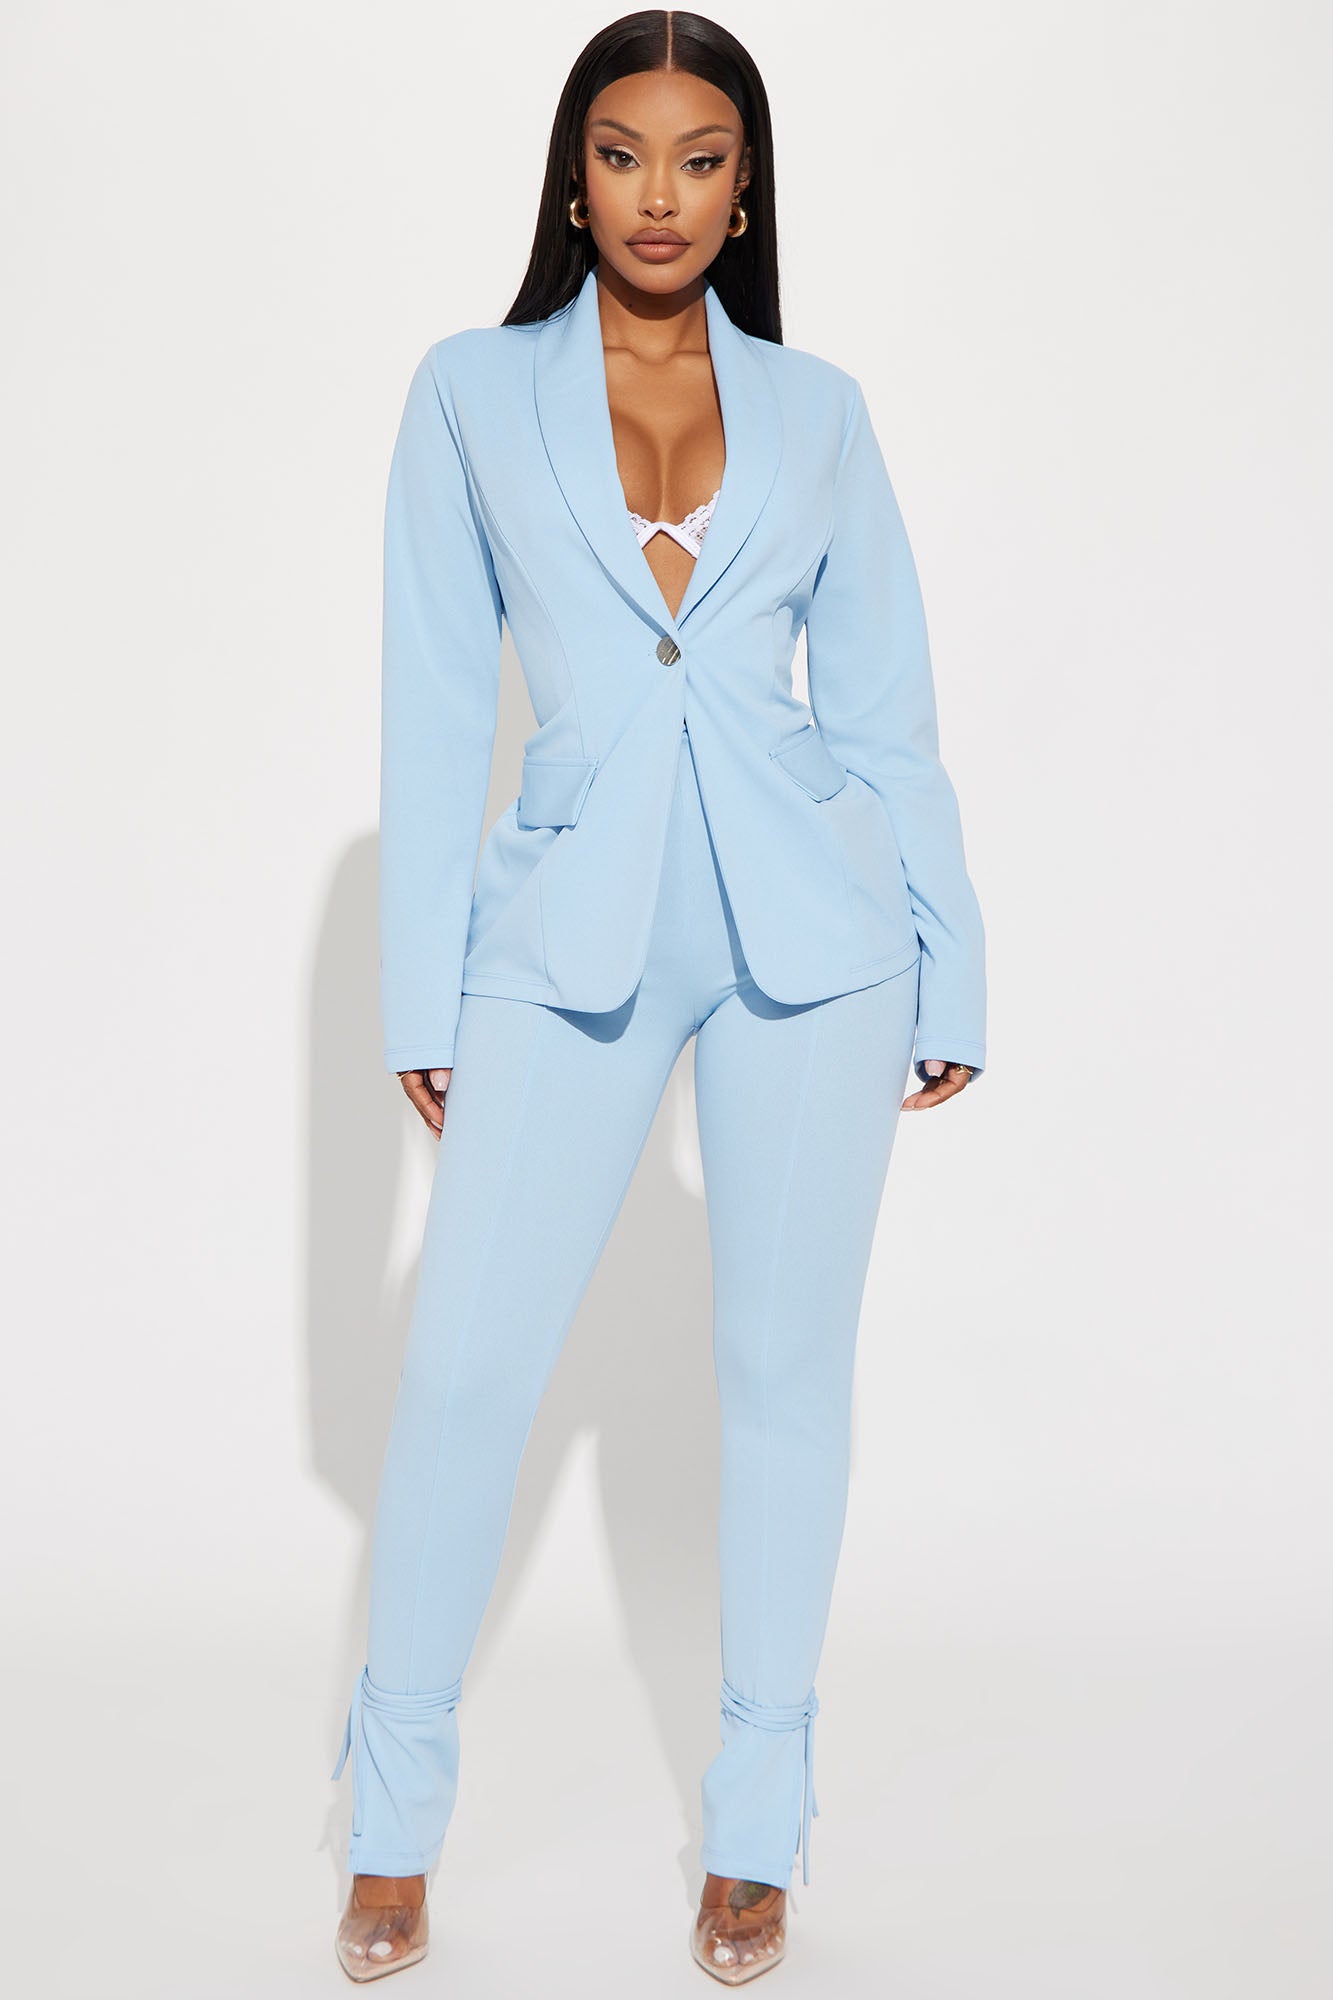 Head Of The Table Pant Suit - Light Blue